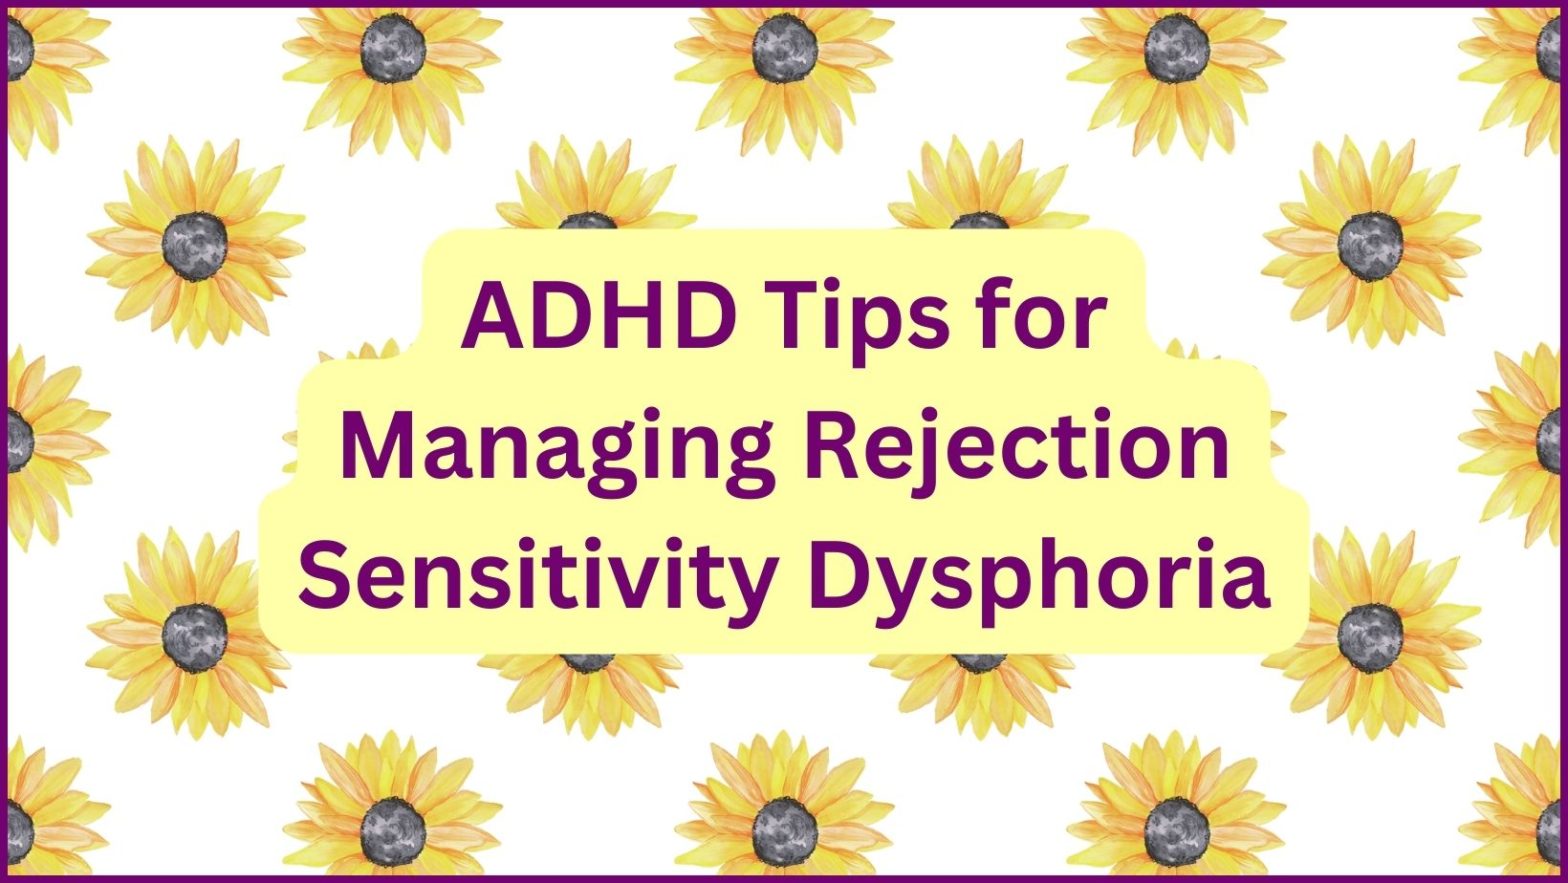 ADHD Tips for Managing Rejection Sensitivity Dysphoria